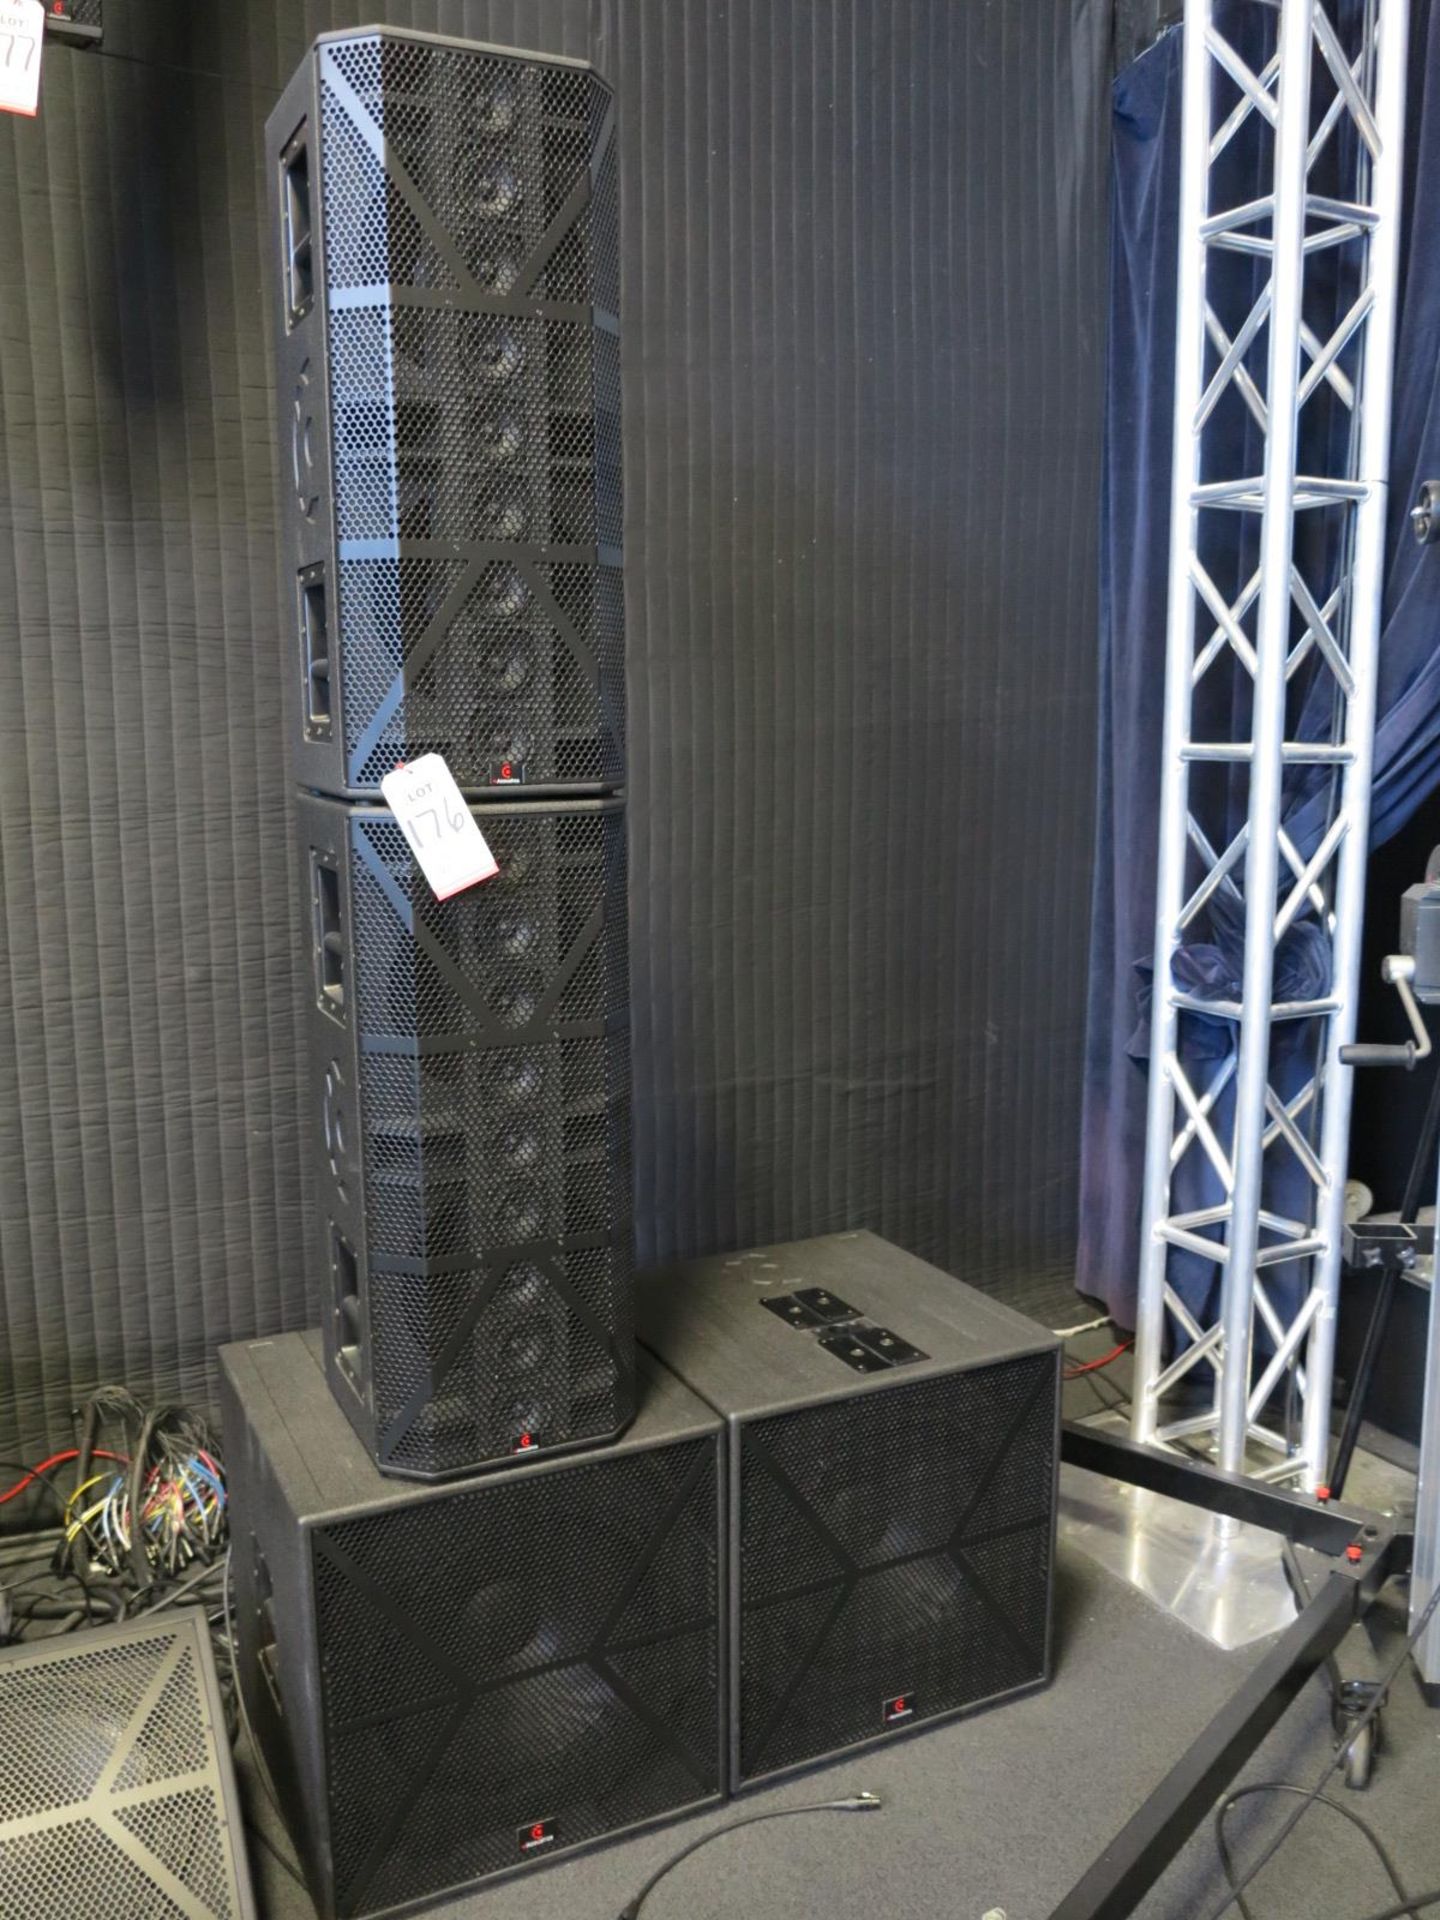 LOT - (2) EACOUSTICS GORILLA 318A SUBWOOFERS AND (2) RAVEN 500A COLUMN ARRAY SPEAKERS